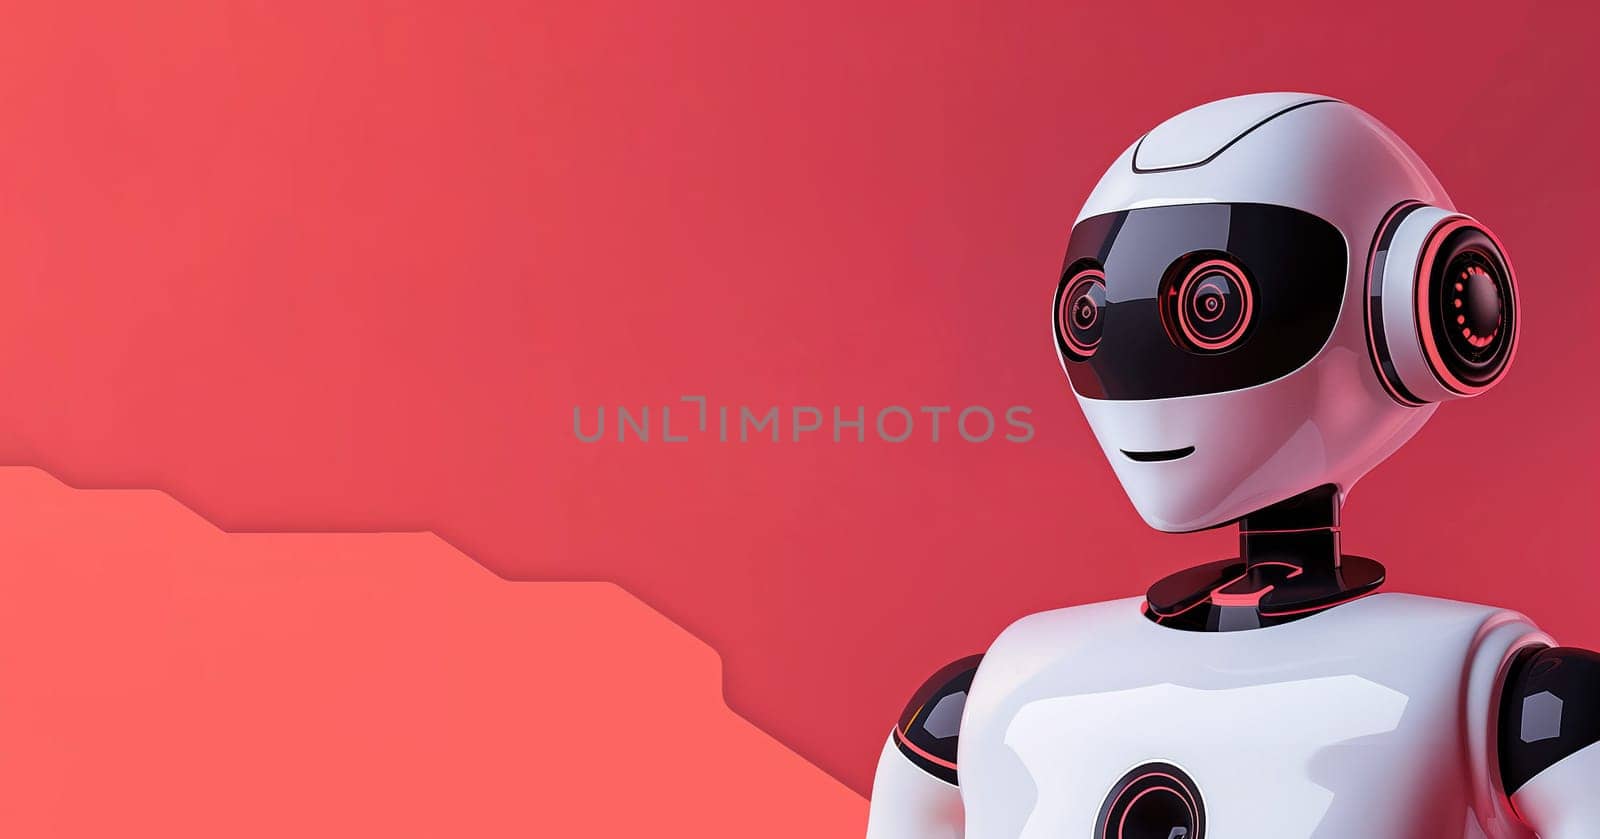 Cute Cyber Robot Portrait with Place For Text, UX UI Web-Design Banner.